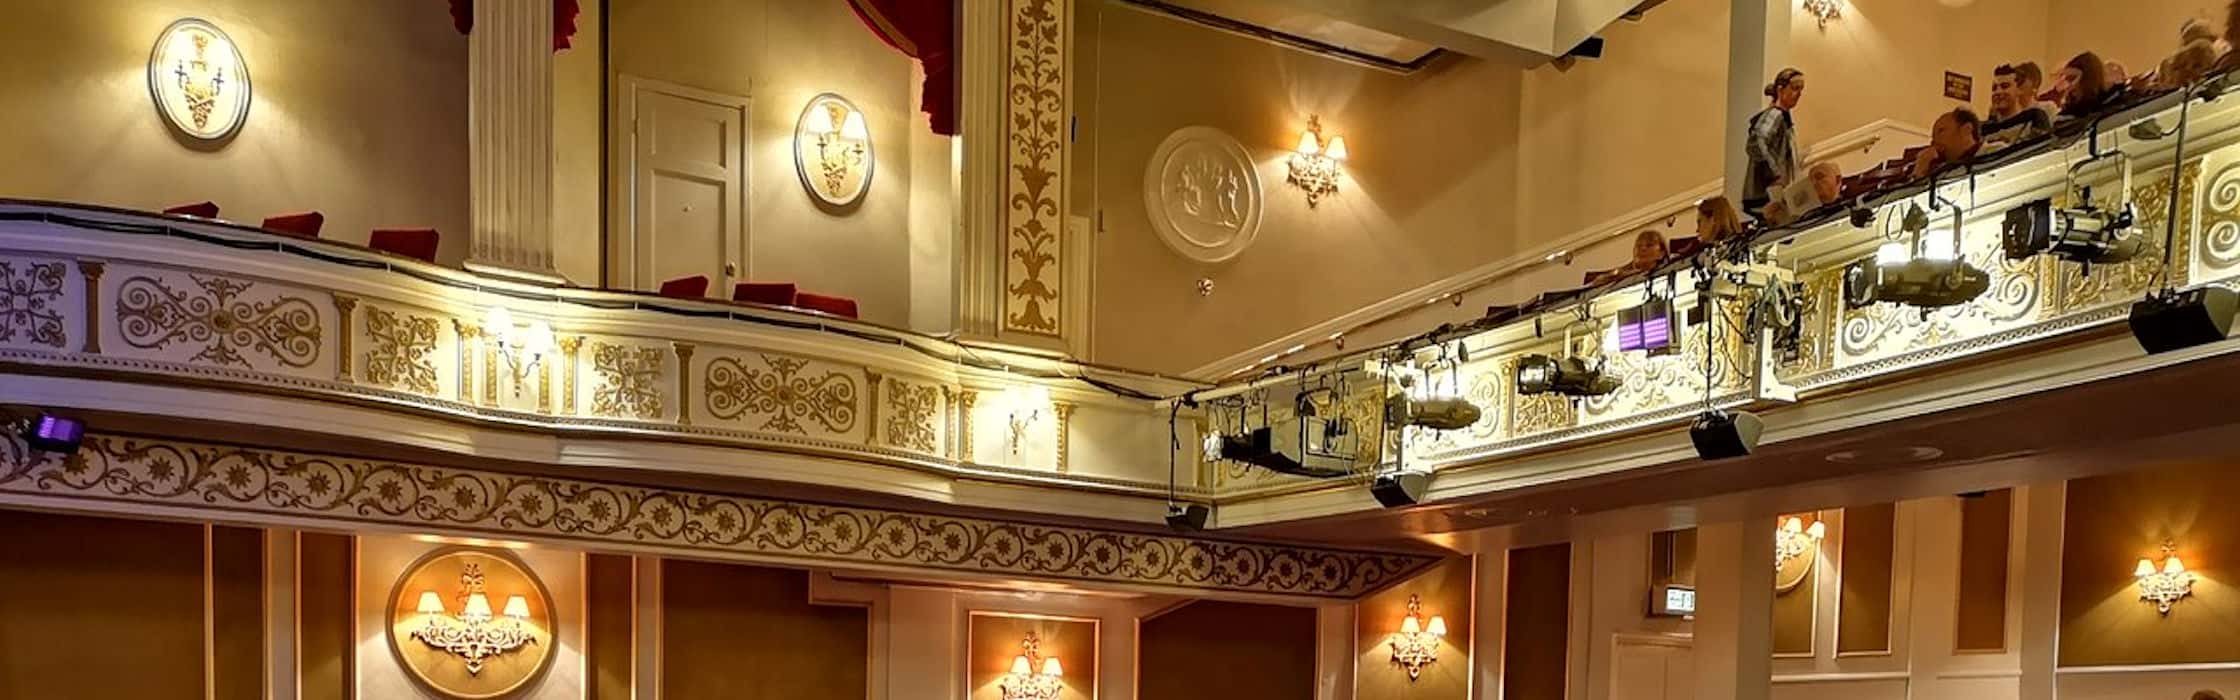 What's On at The Vaudeville Theatre, London